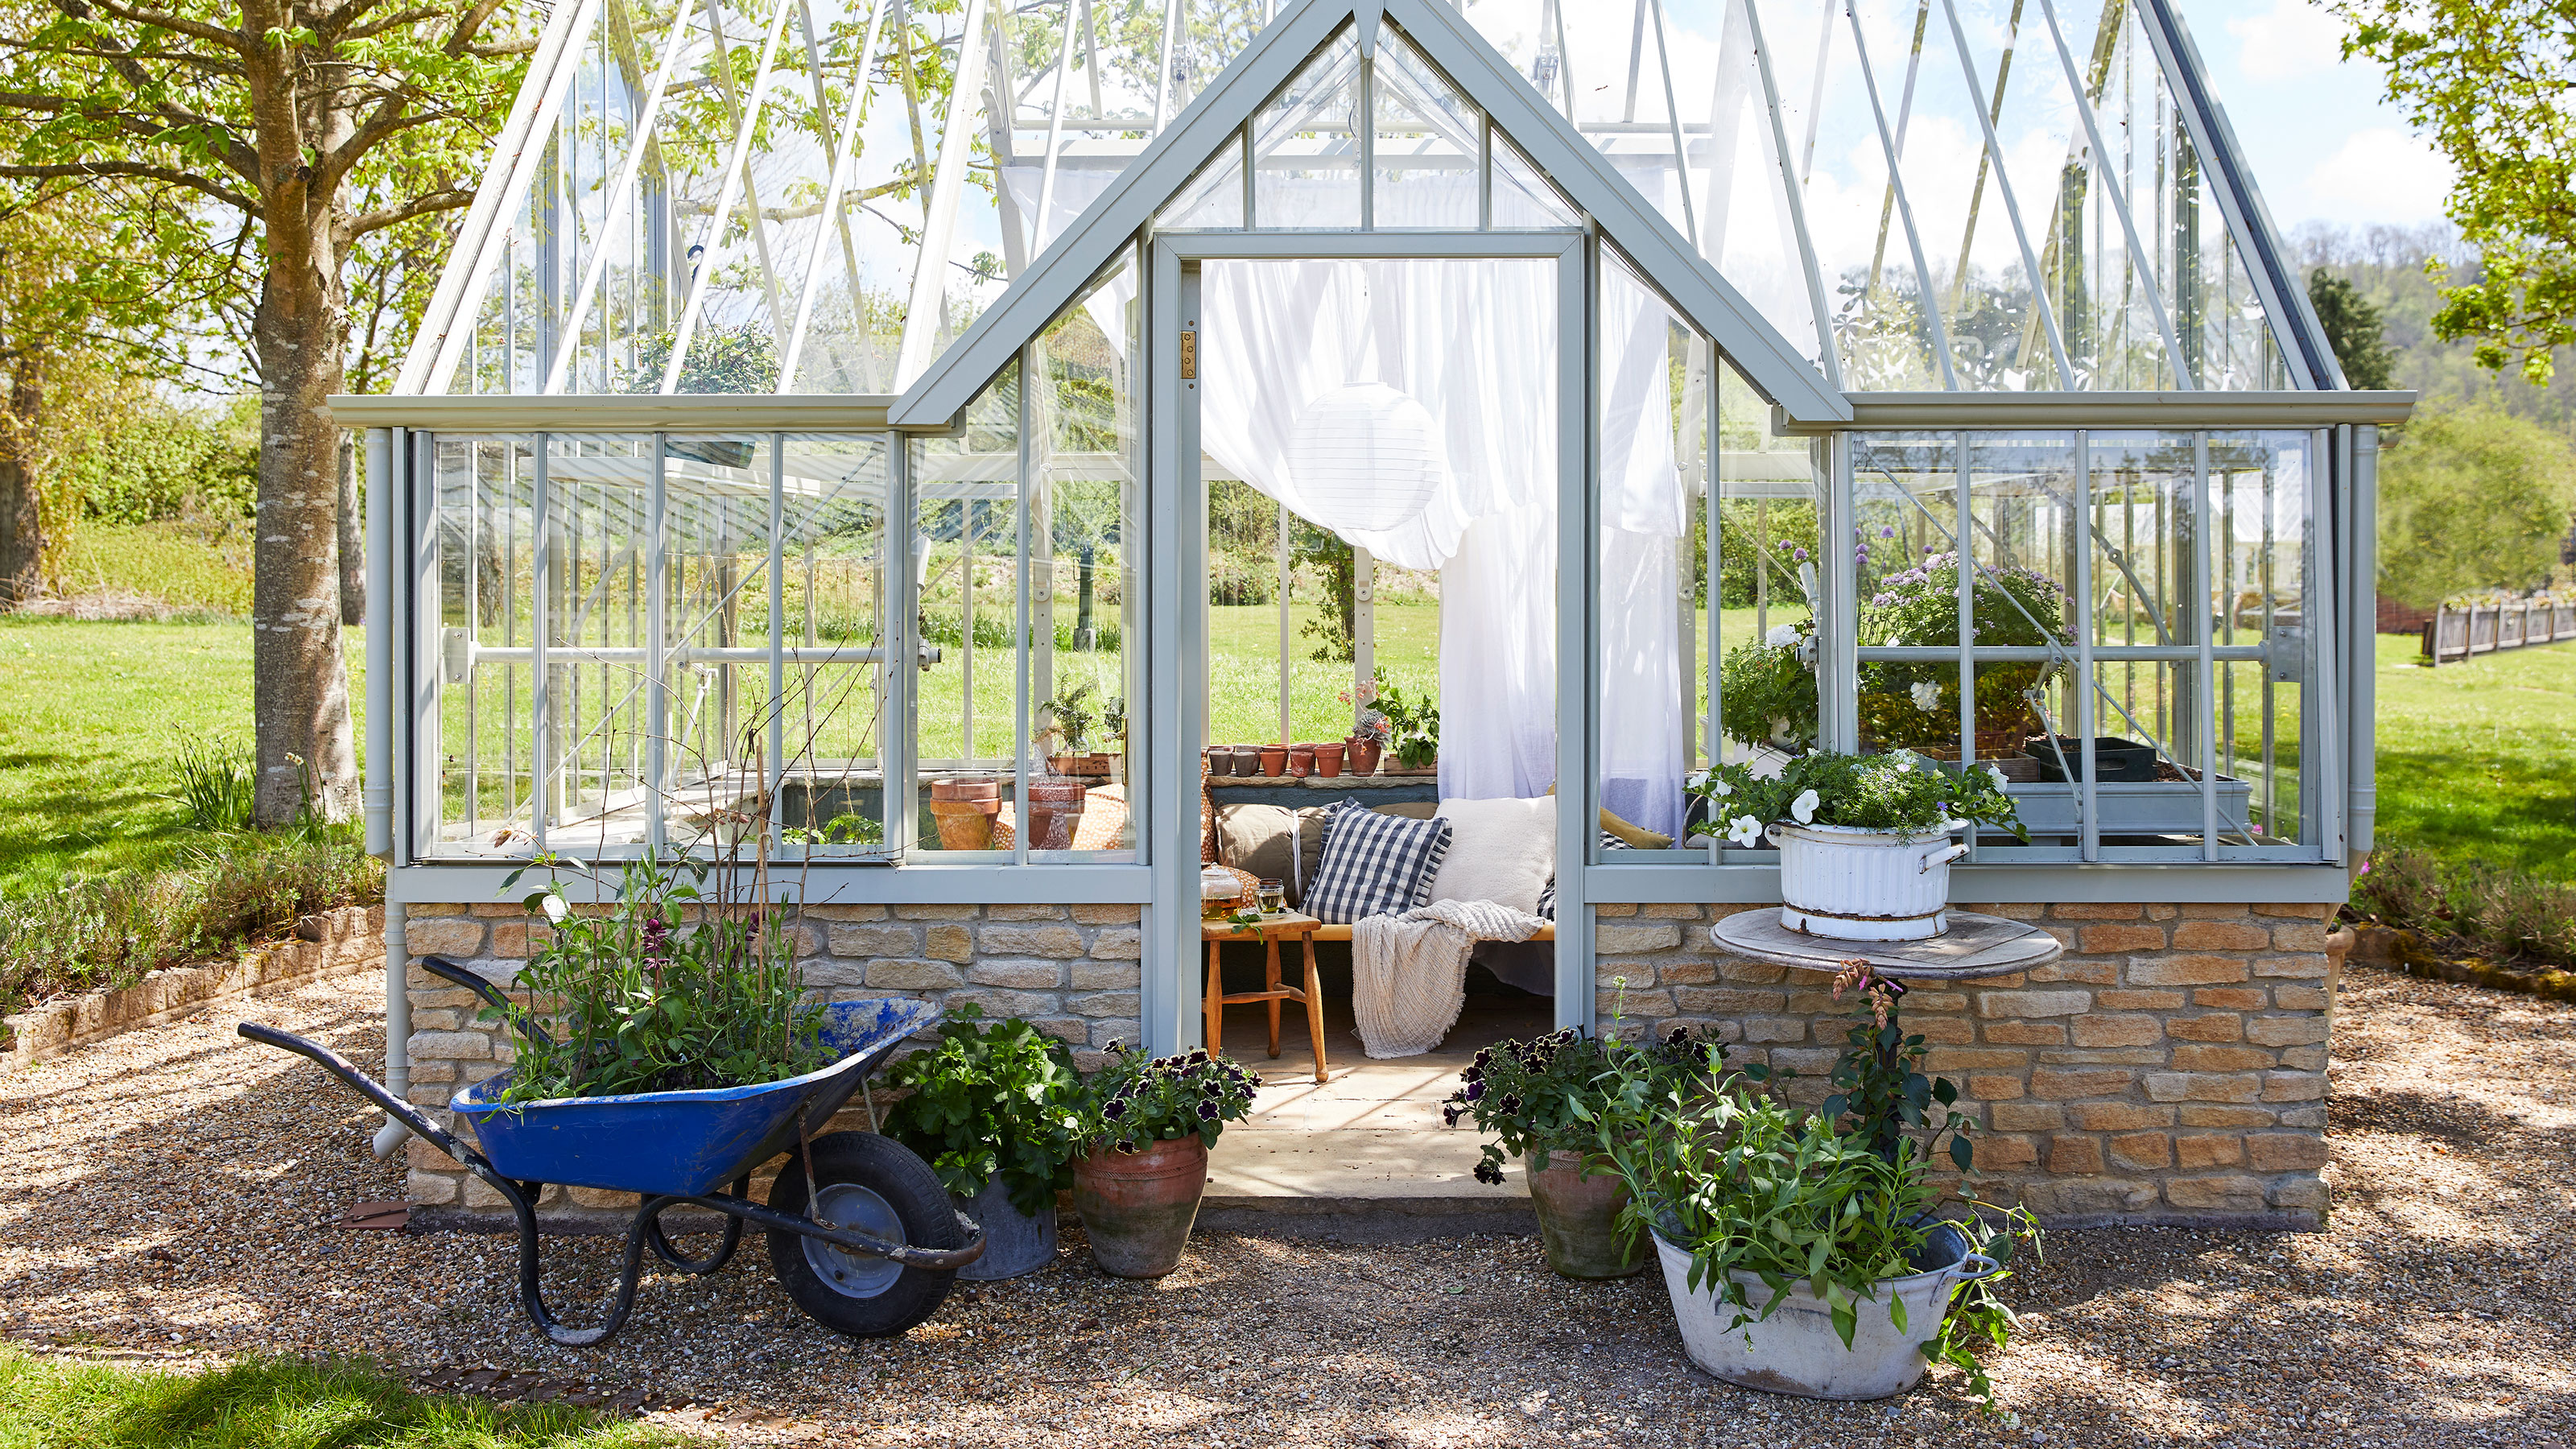 Greenhouse Ideas: 16 Tips To Get The Most Out Of Yours | Gardeningetc